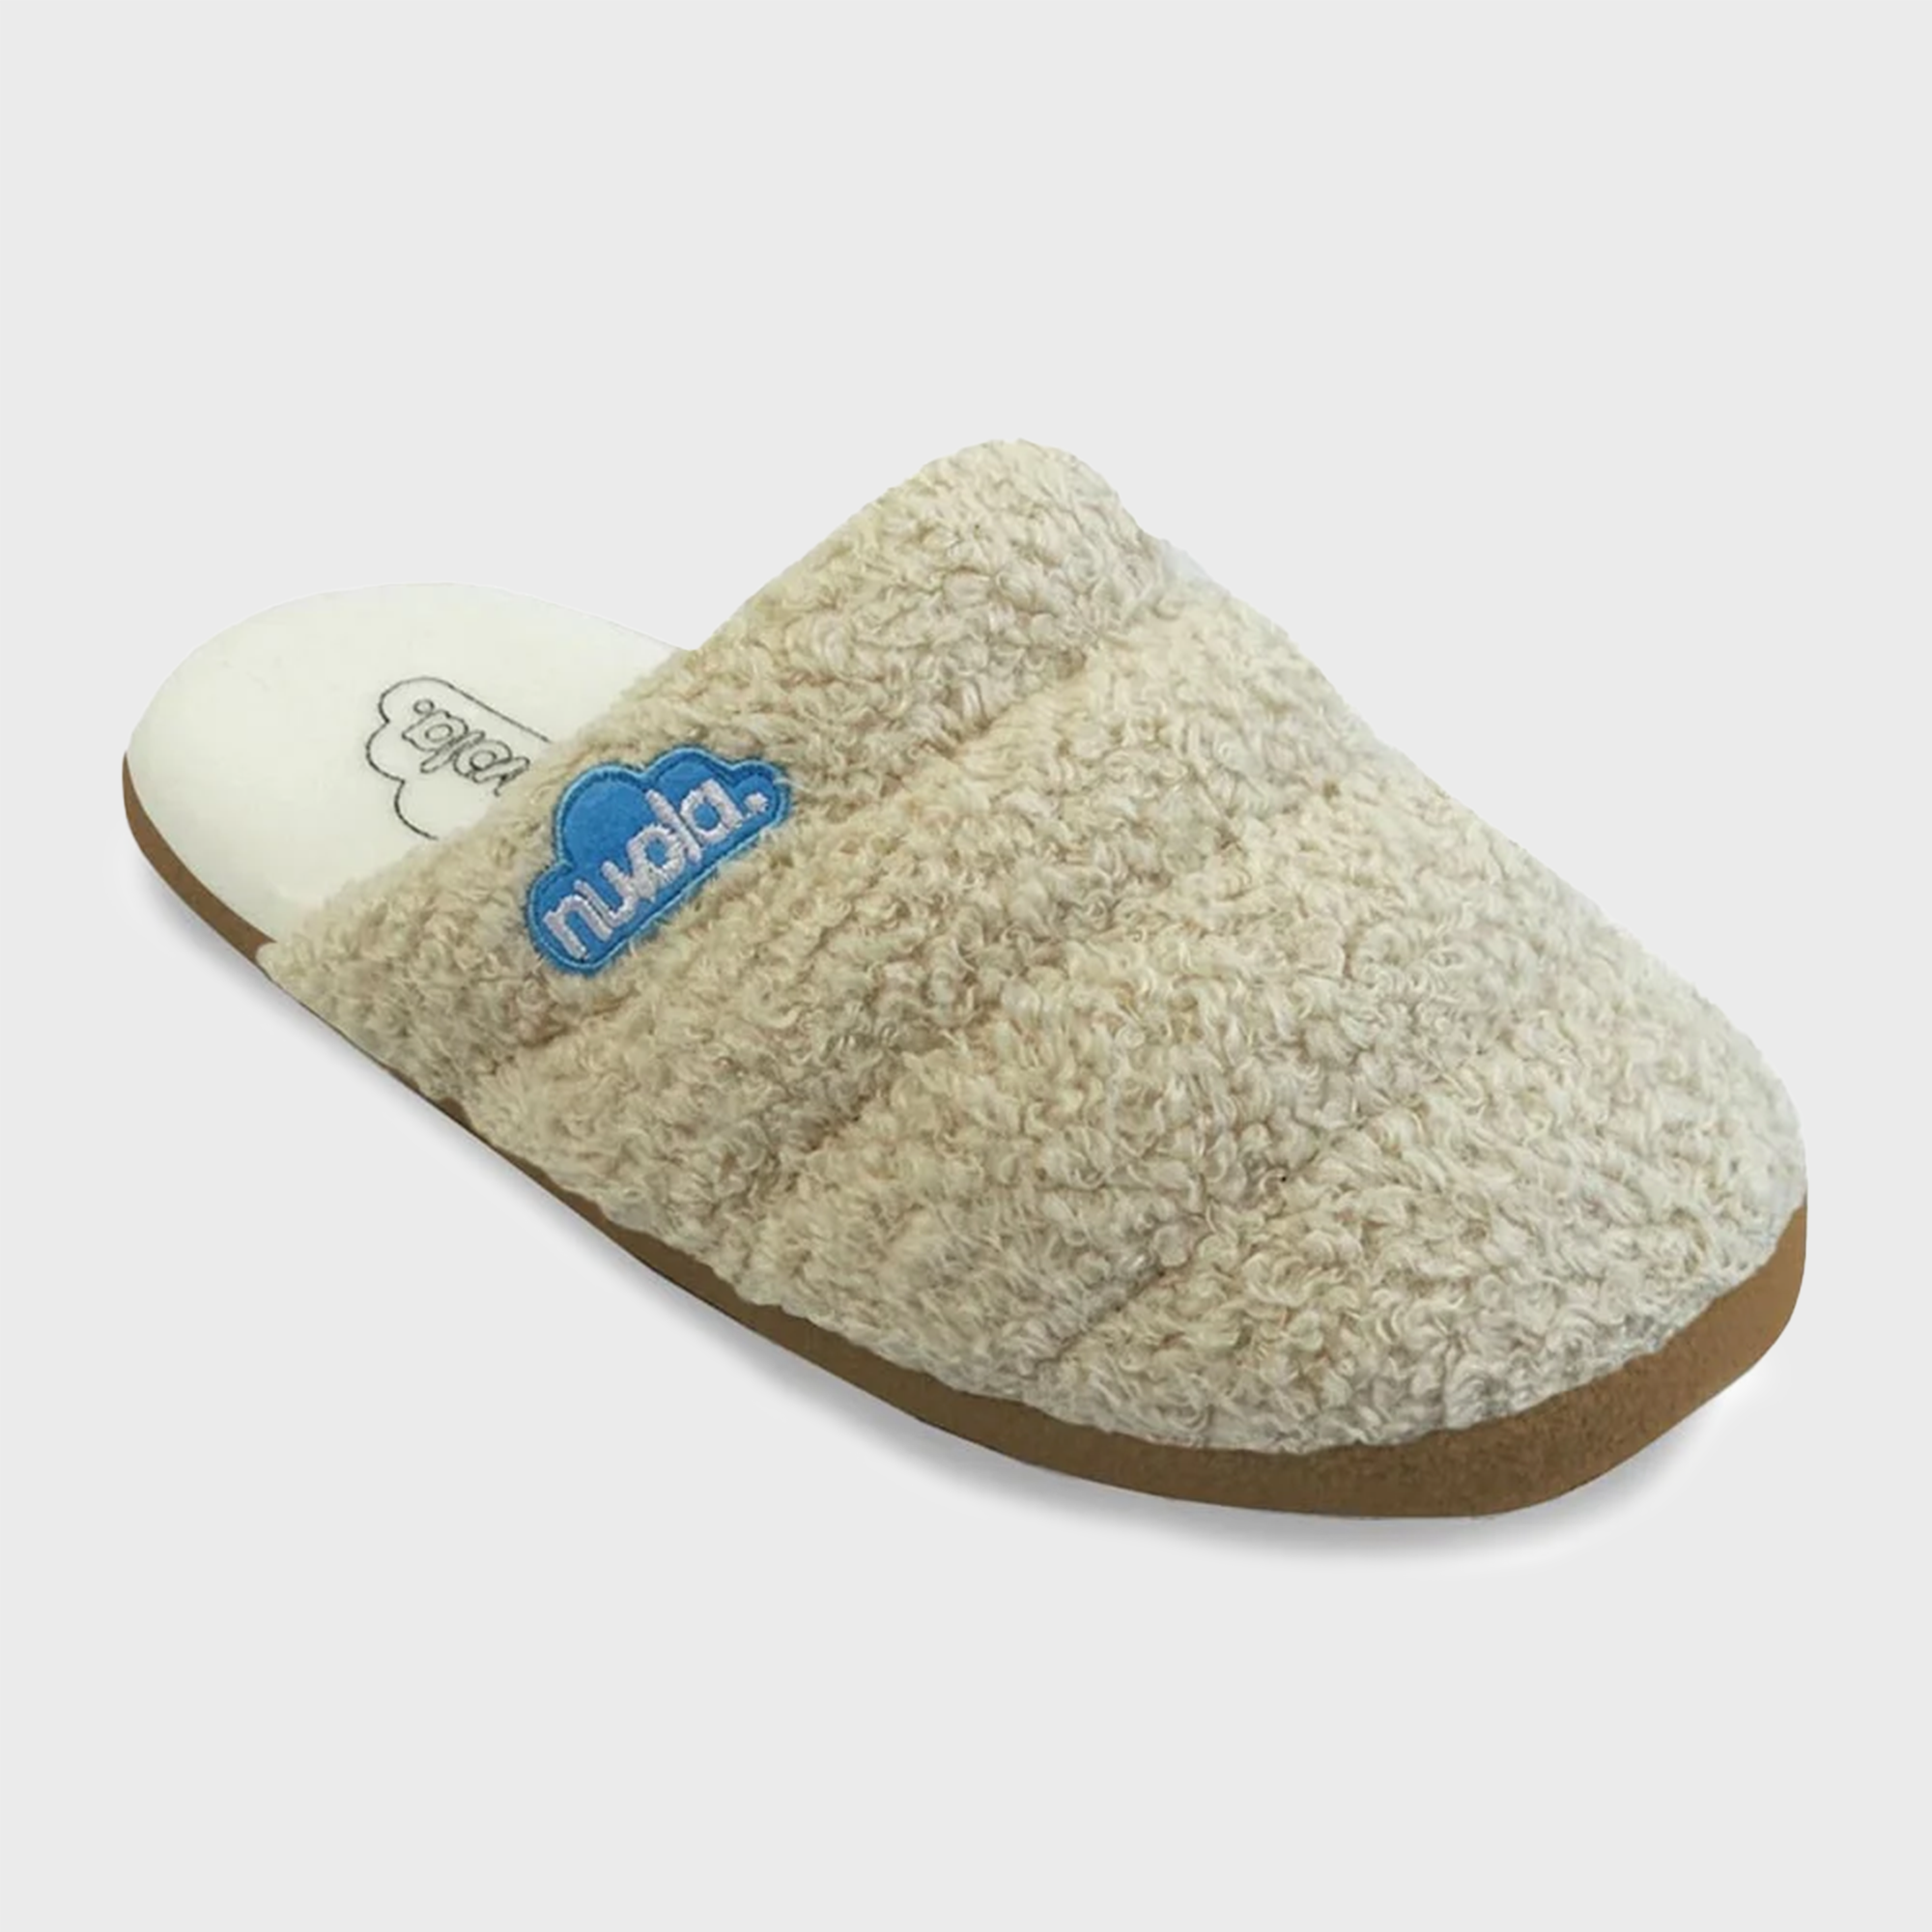 Nuvola Zueco Sheep Slippers in Cream CNZSHEP697 FROM EIGHTYWINGOLD - OFFICIAL BRAND PARTNER